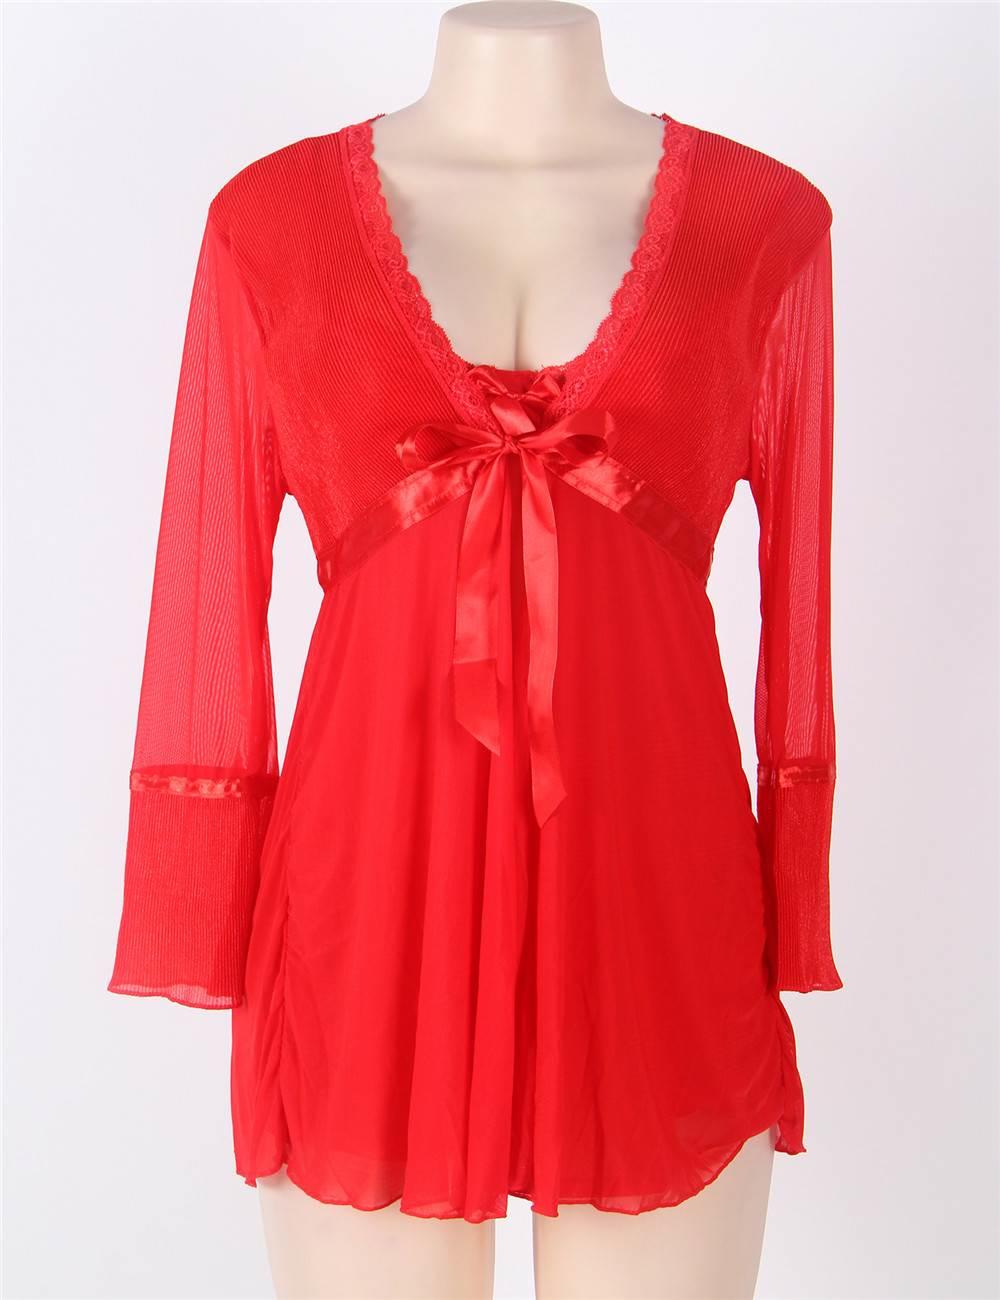 Red Sheer Robe & Babydoll set front view.